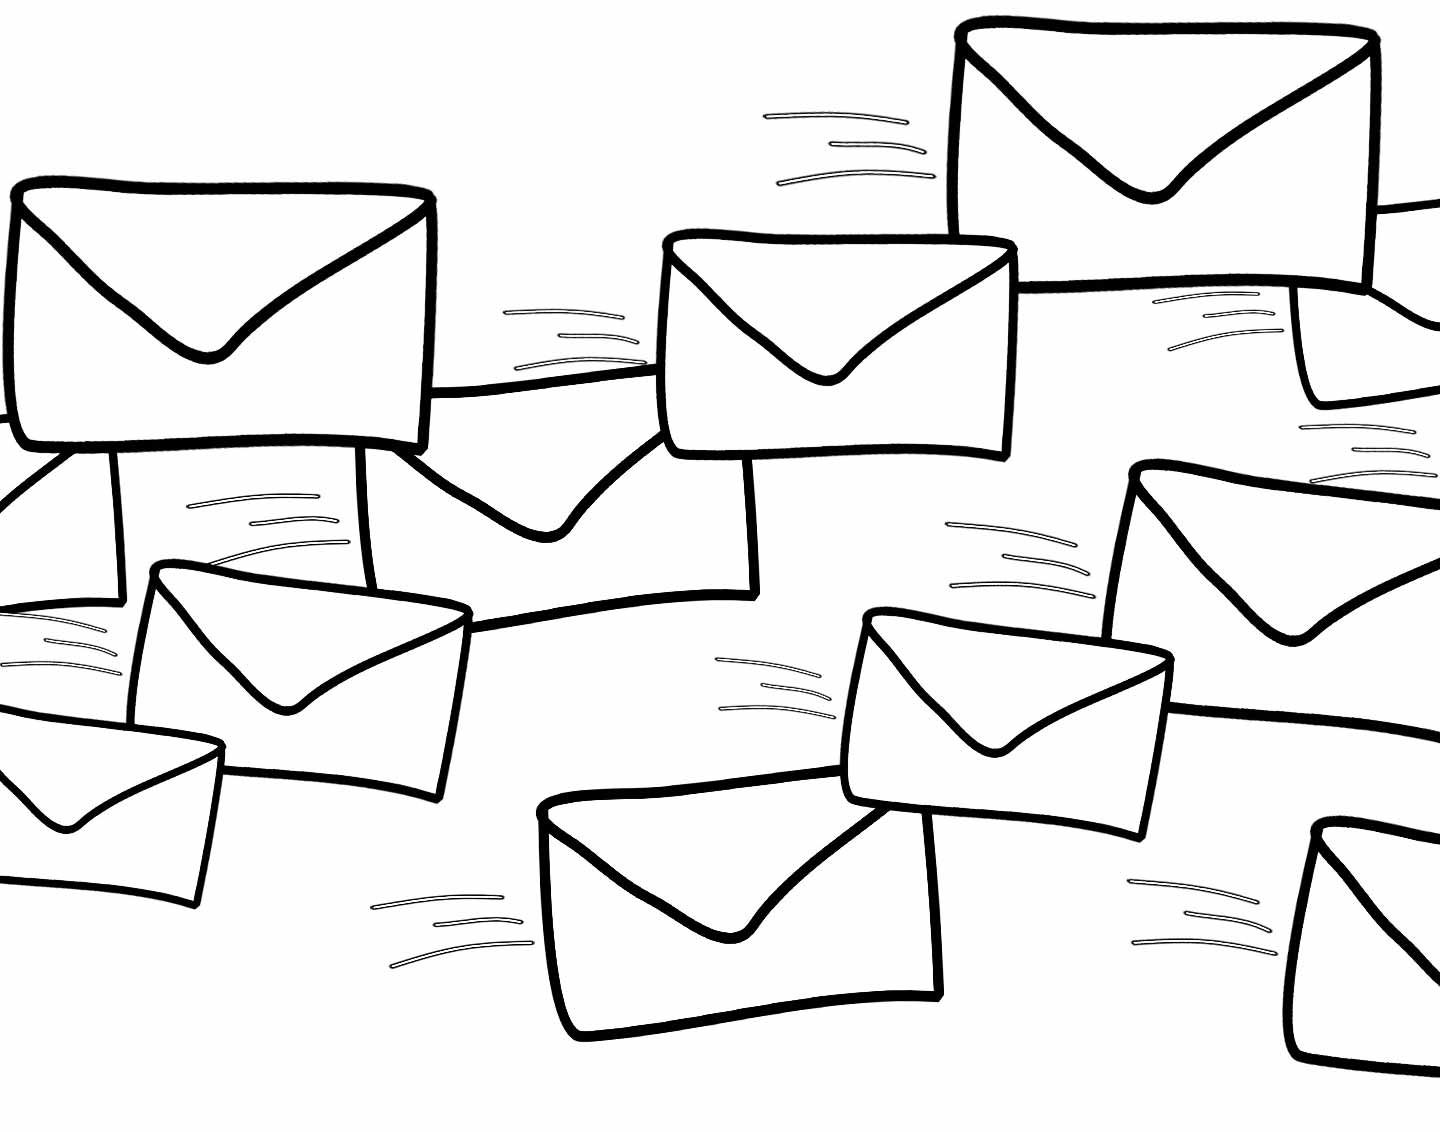 The Resurgence of Email